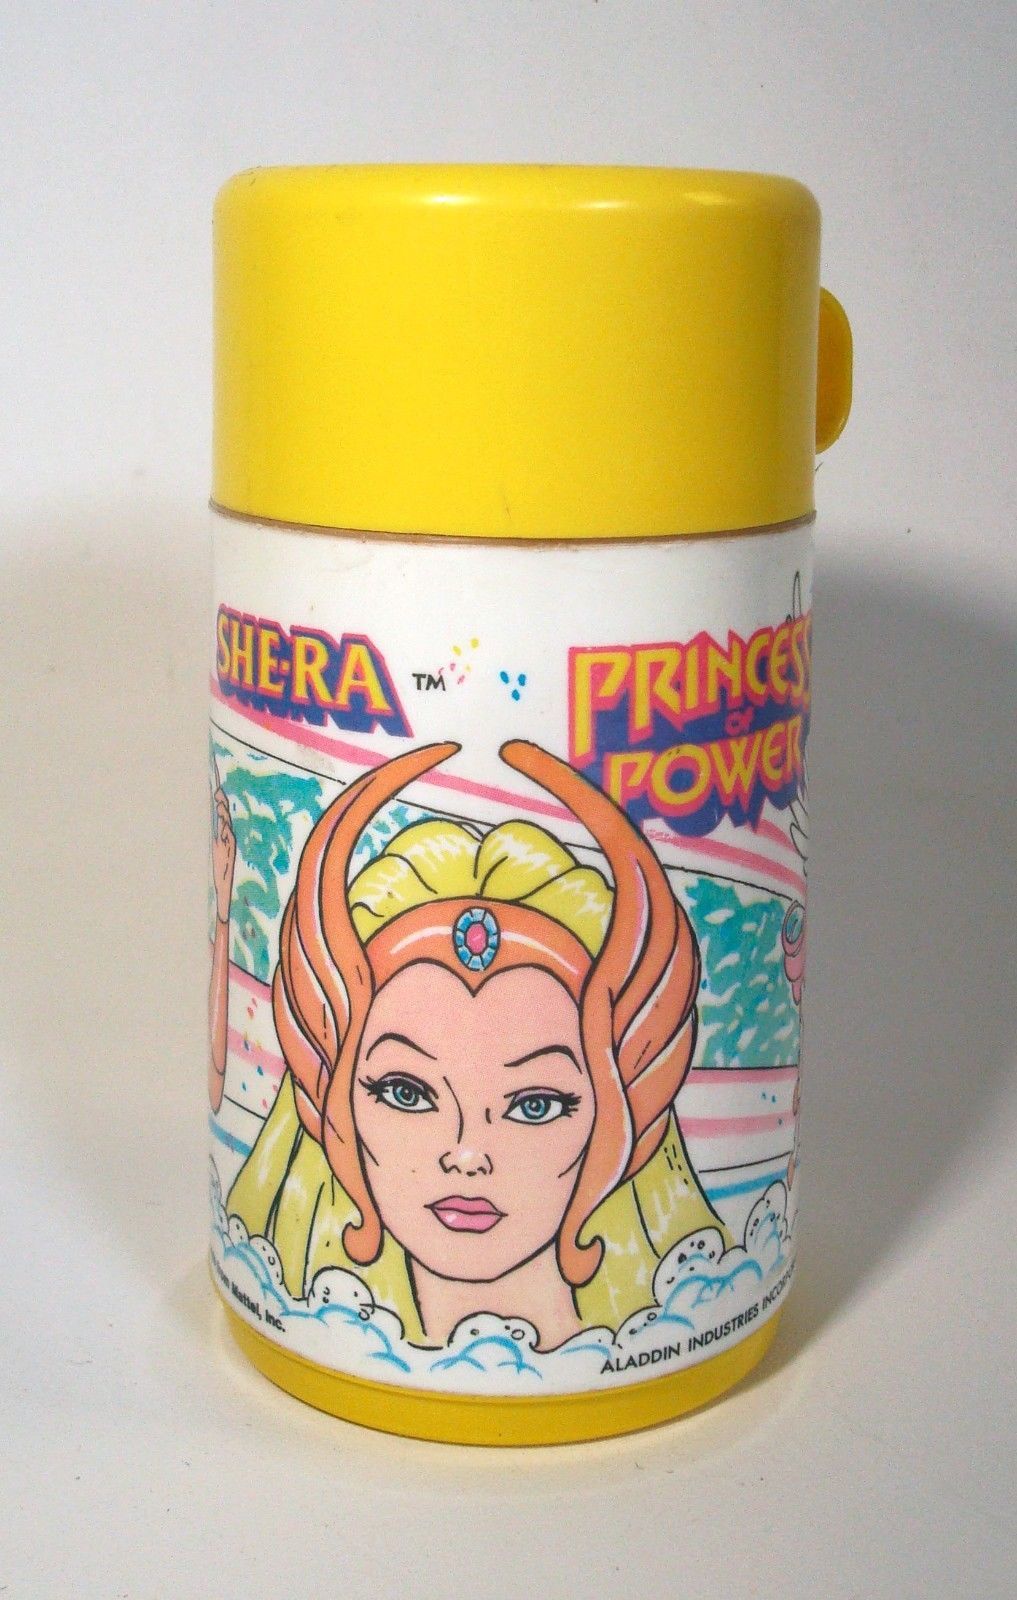 She-Ra: Princess of Power (1985) - (figures, dolls, toys and objects) 68